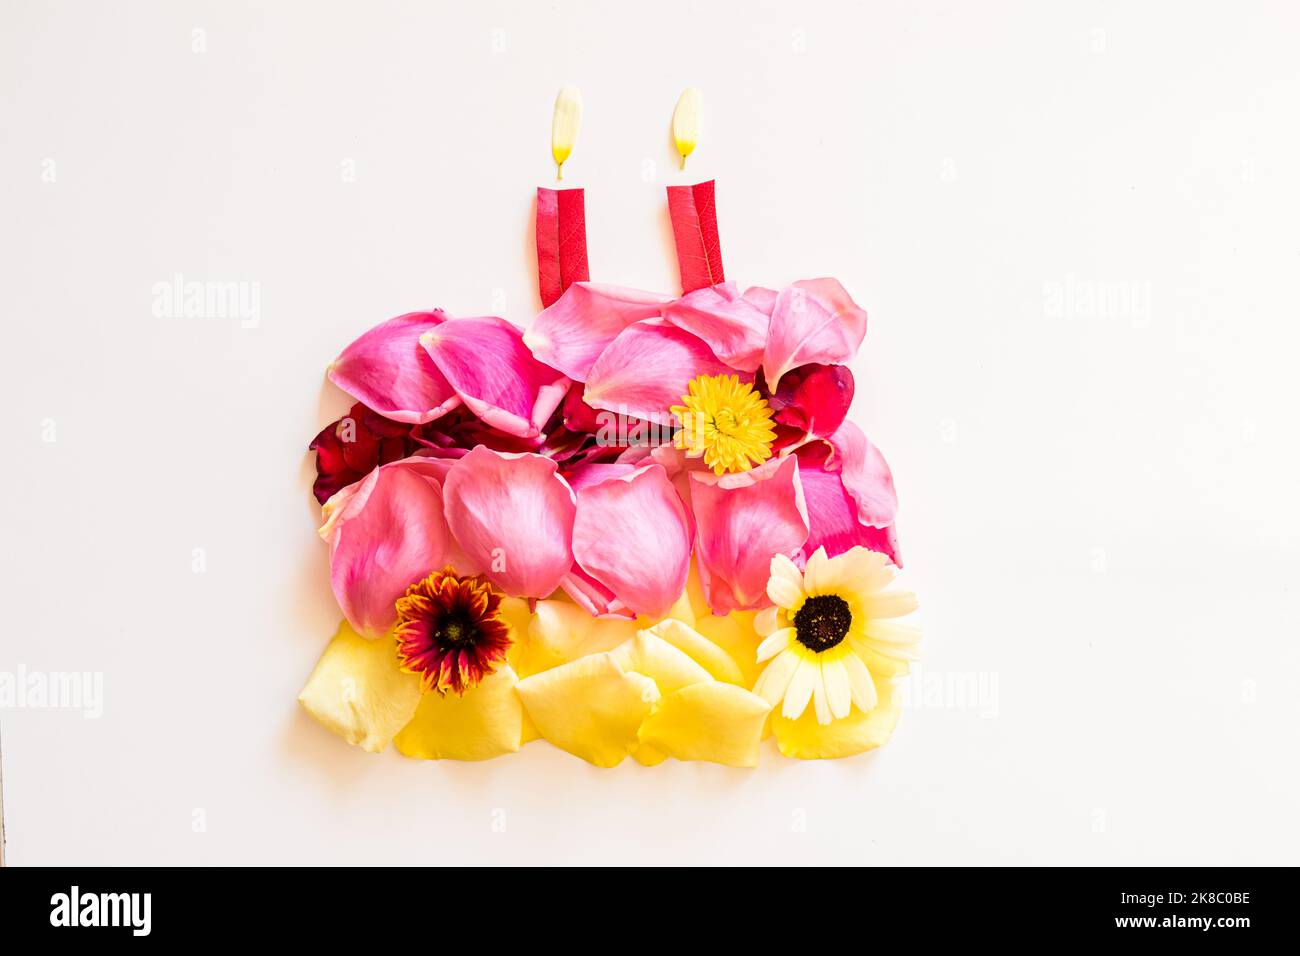 happy birthday cake made from rose petals and leaves Stock Photo